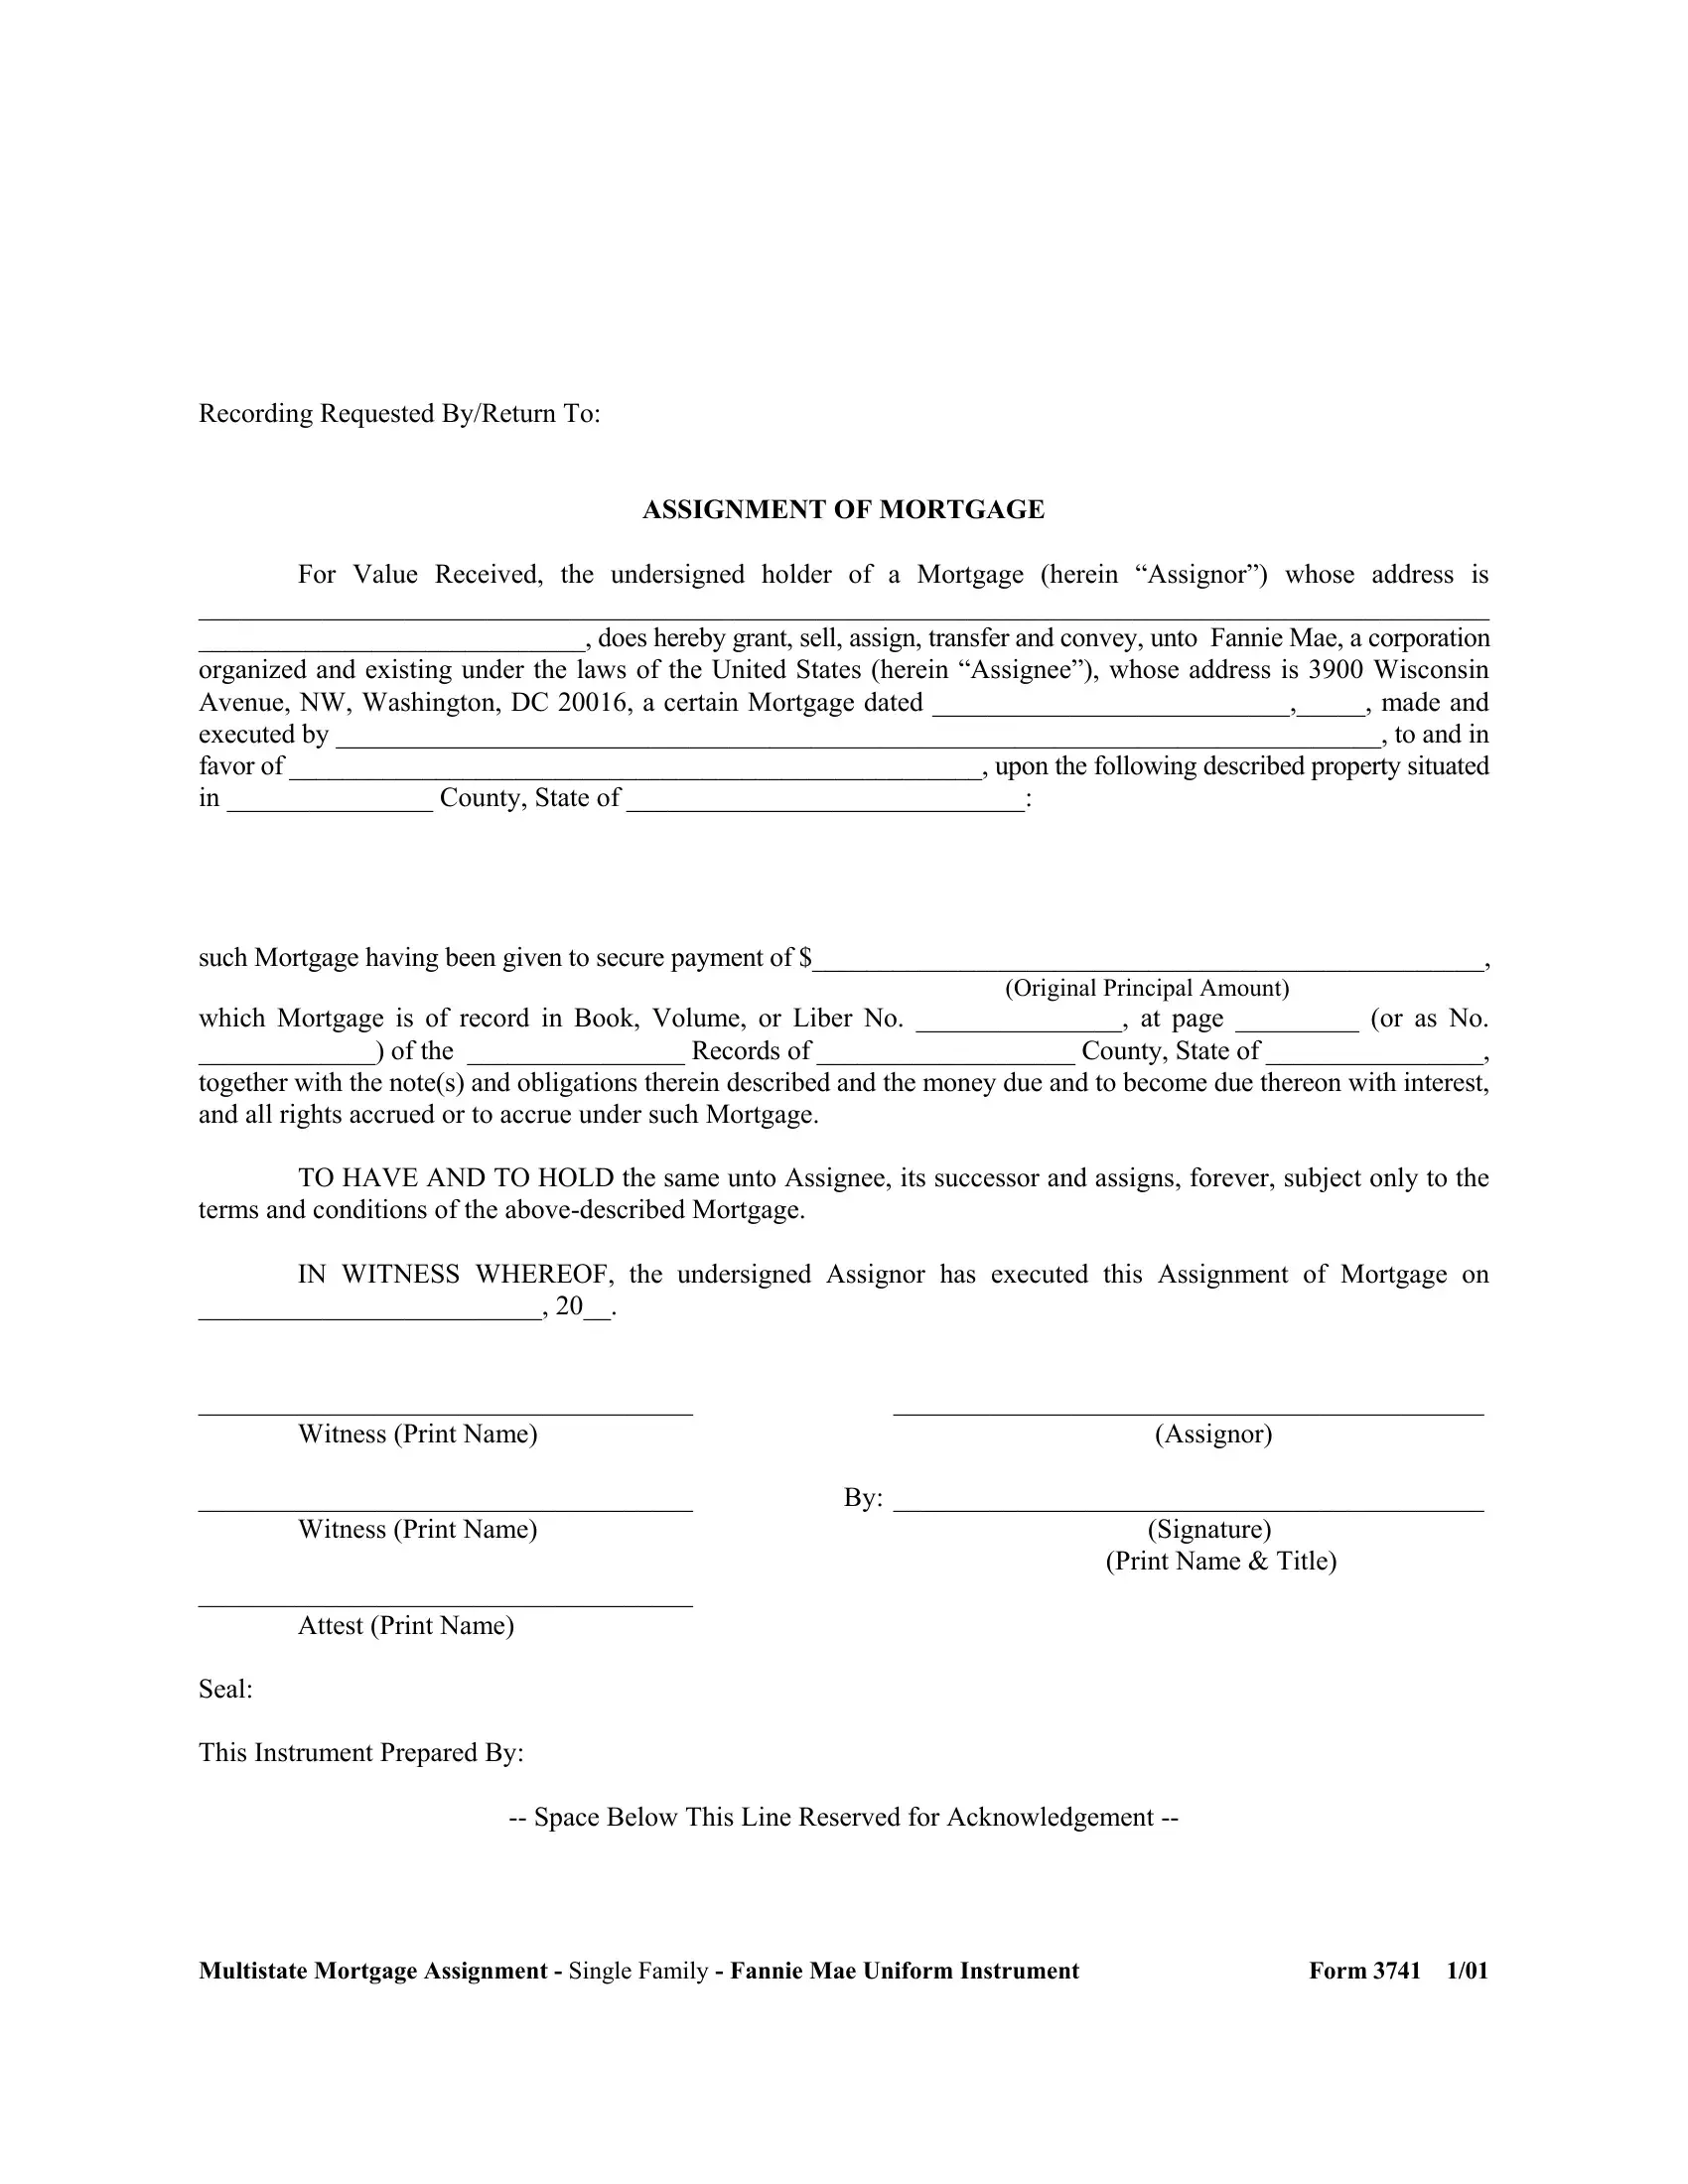 blank assignment of mortgage form